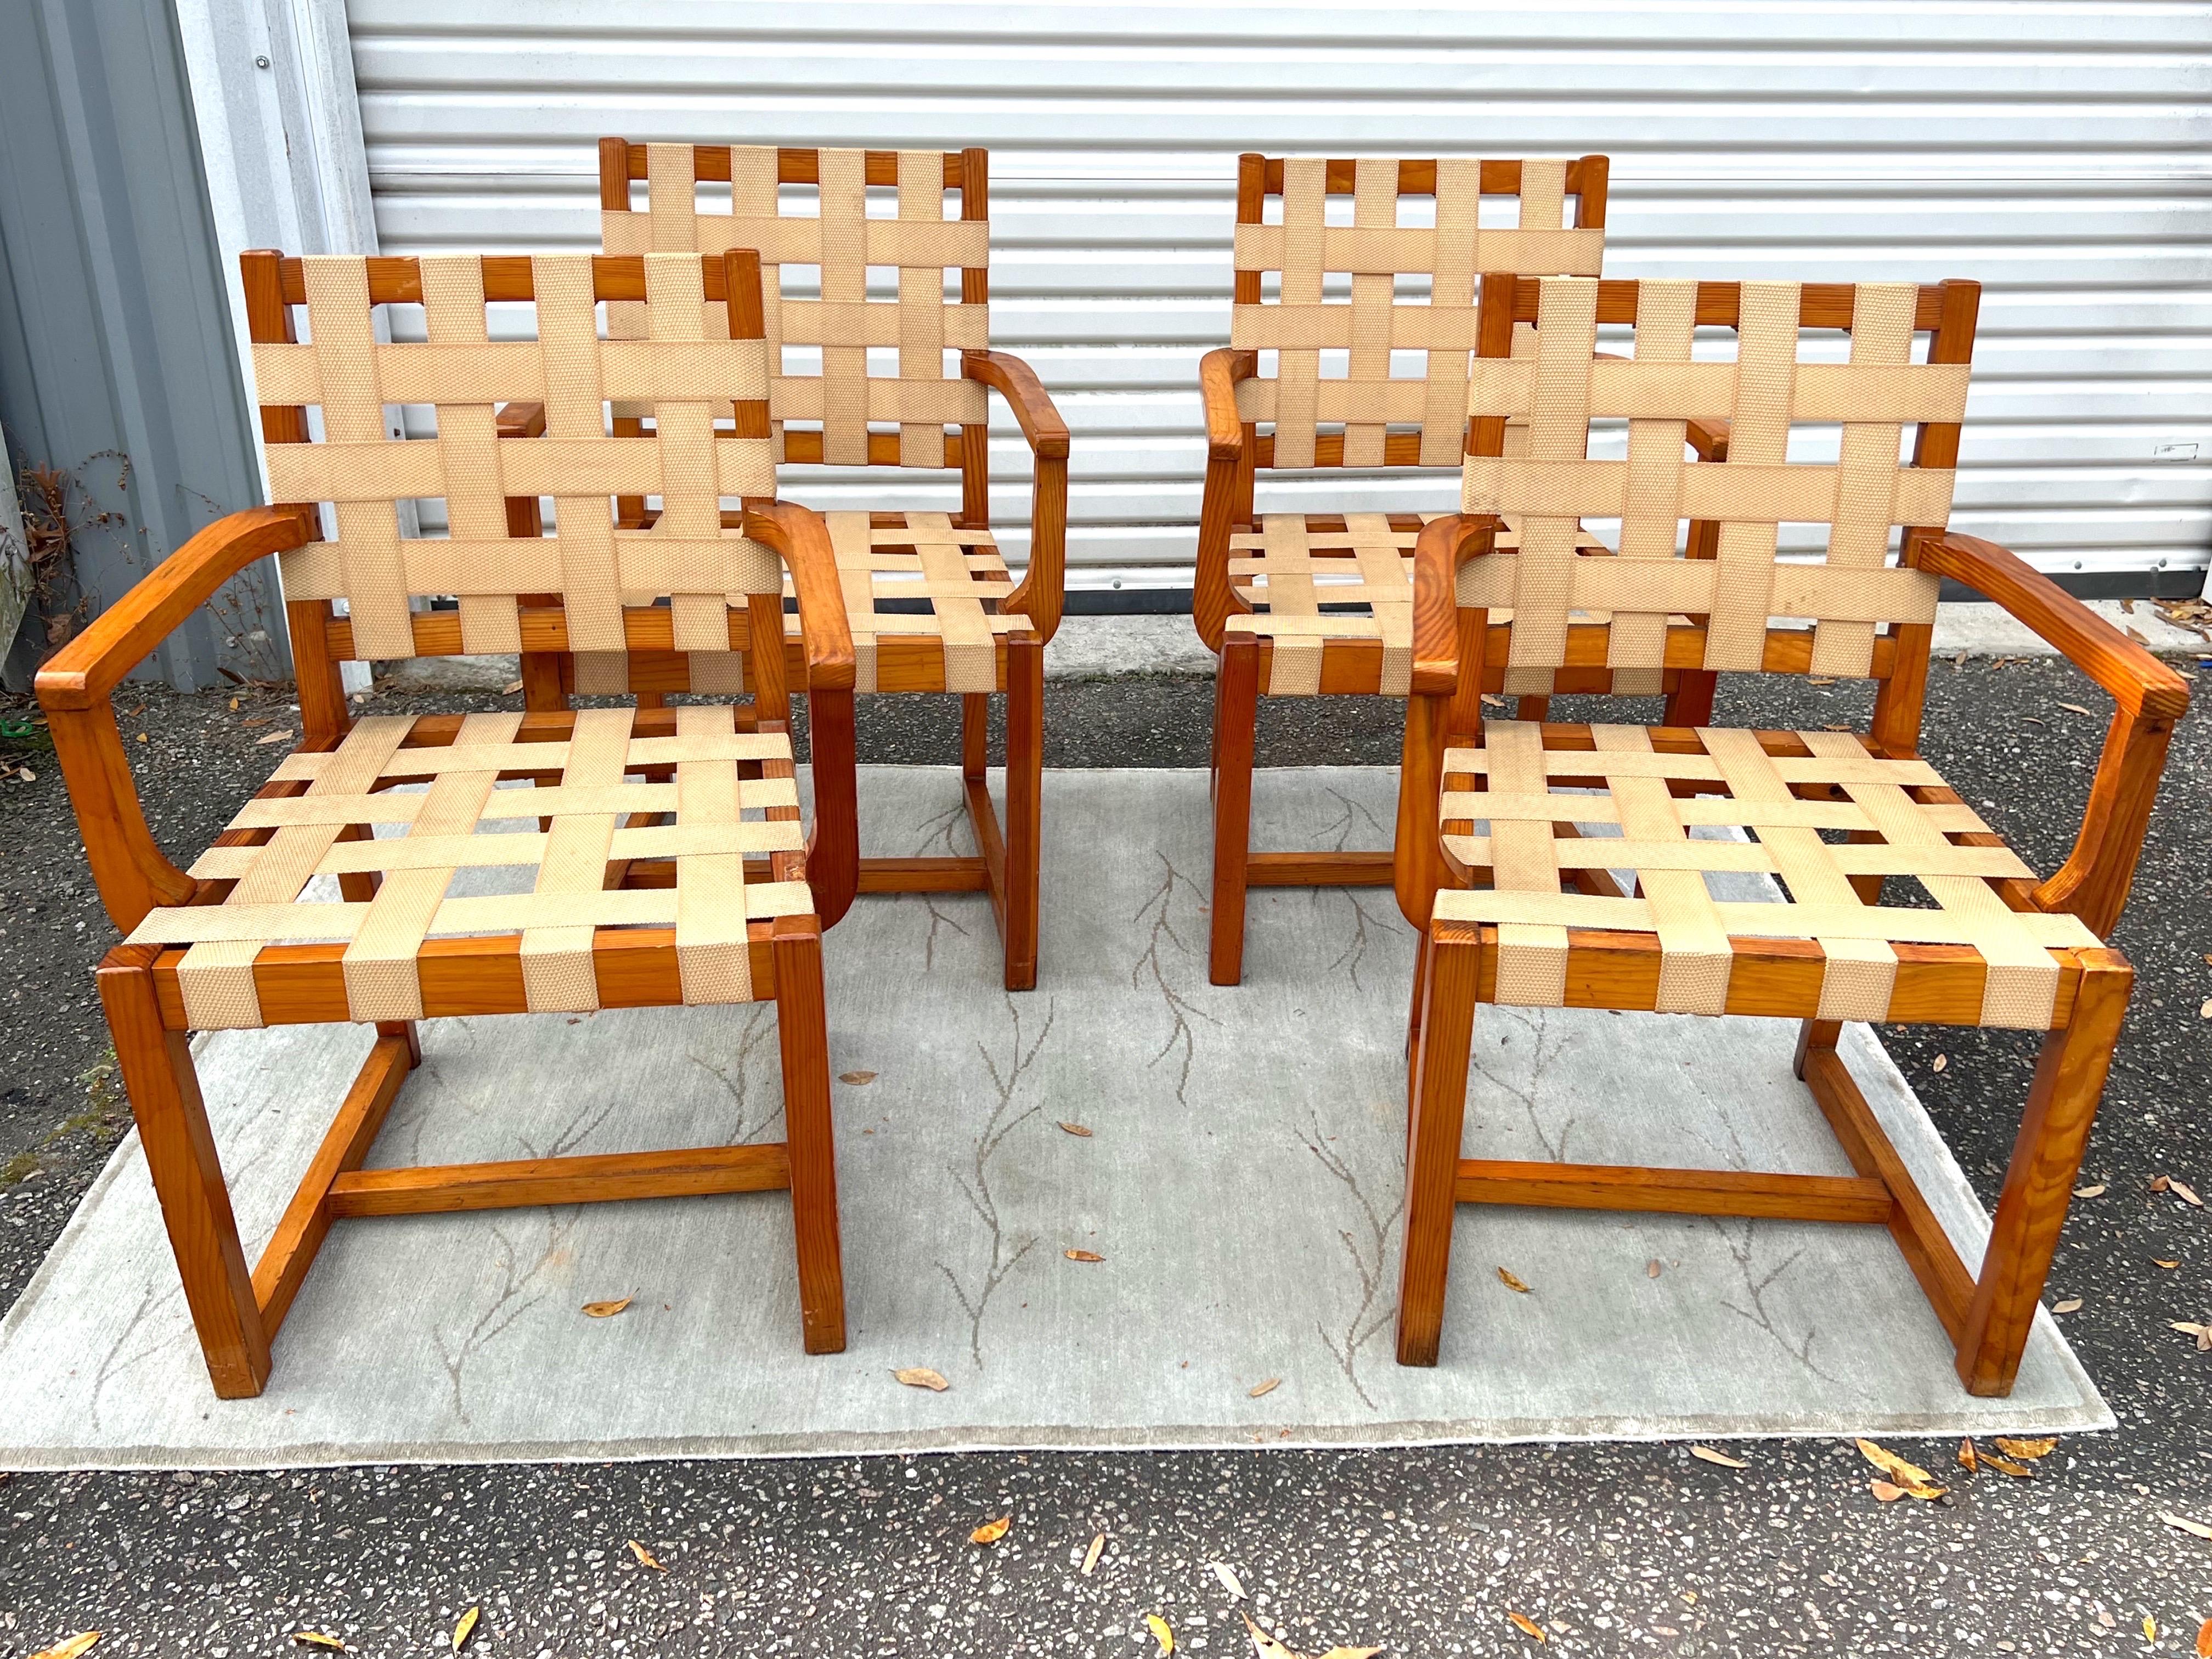 Stunning set of 4 rare midcentury Mexican pine and woven palm dining or side chairs by Michael van Beuren circa 1950s. Gorgeous vintage condition. One chair was clearly used more and repairs have been made. A full life left in these beauts! With the